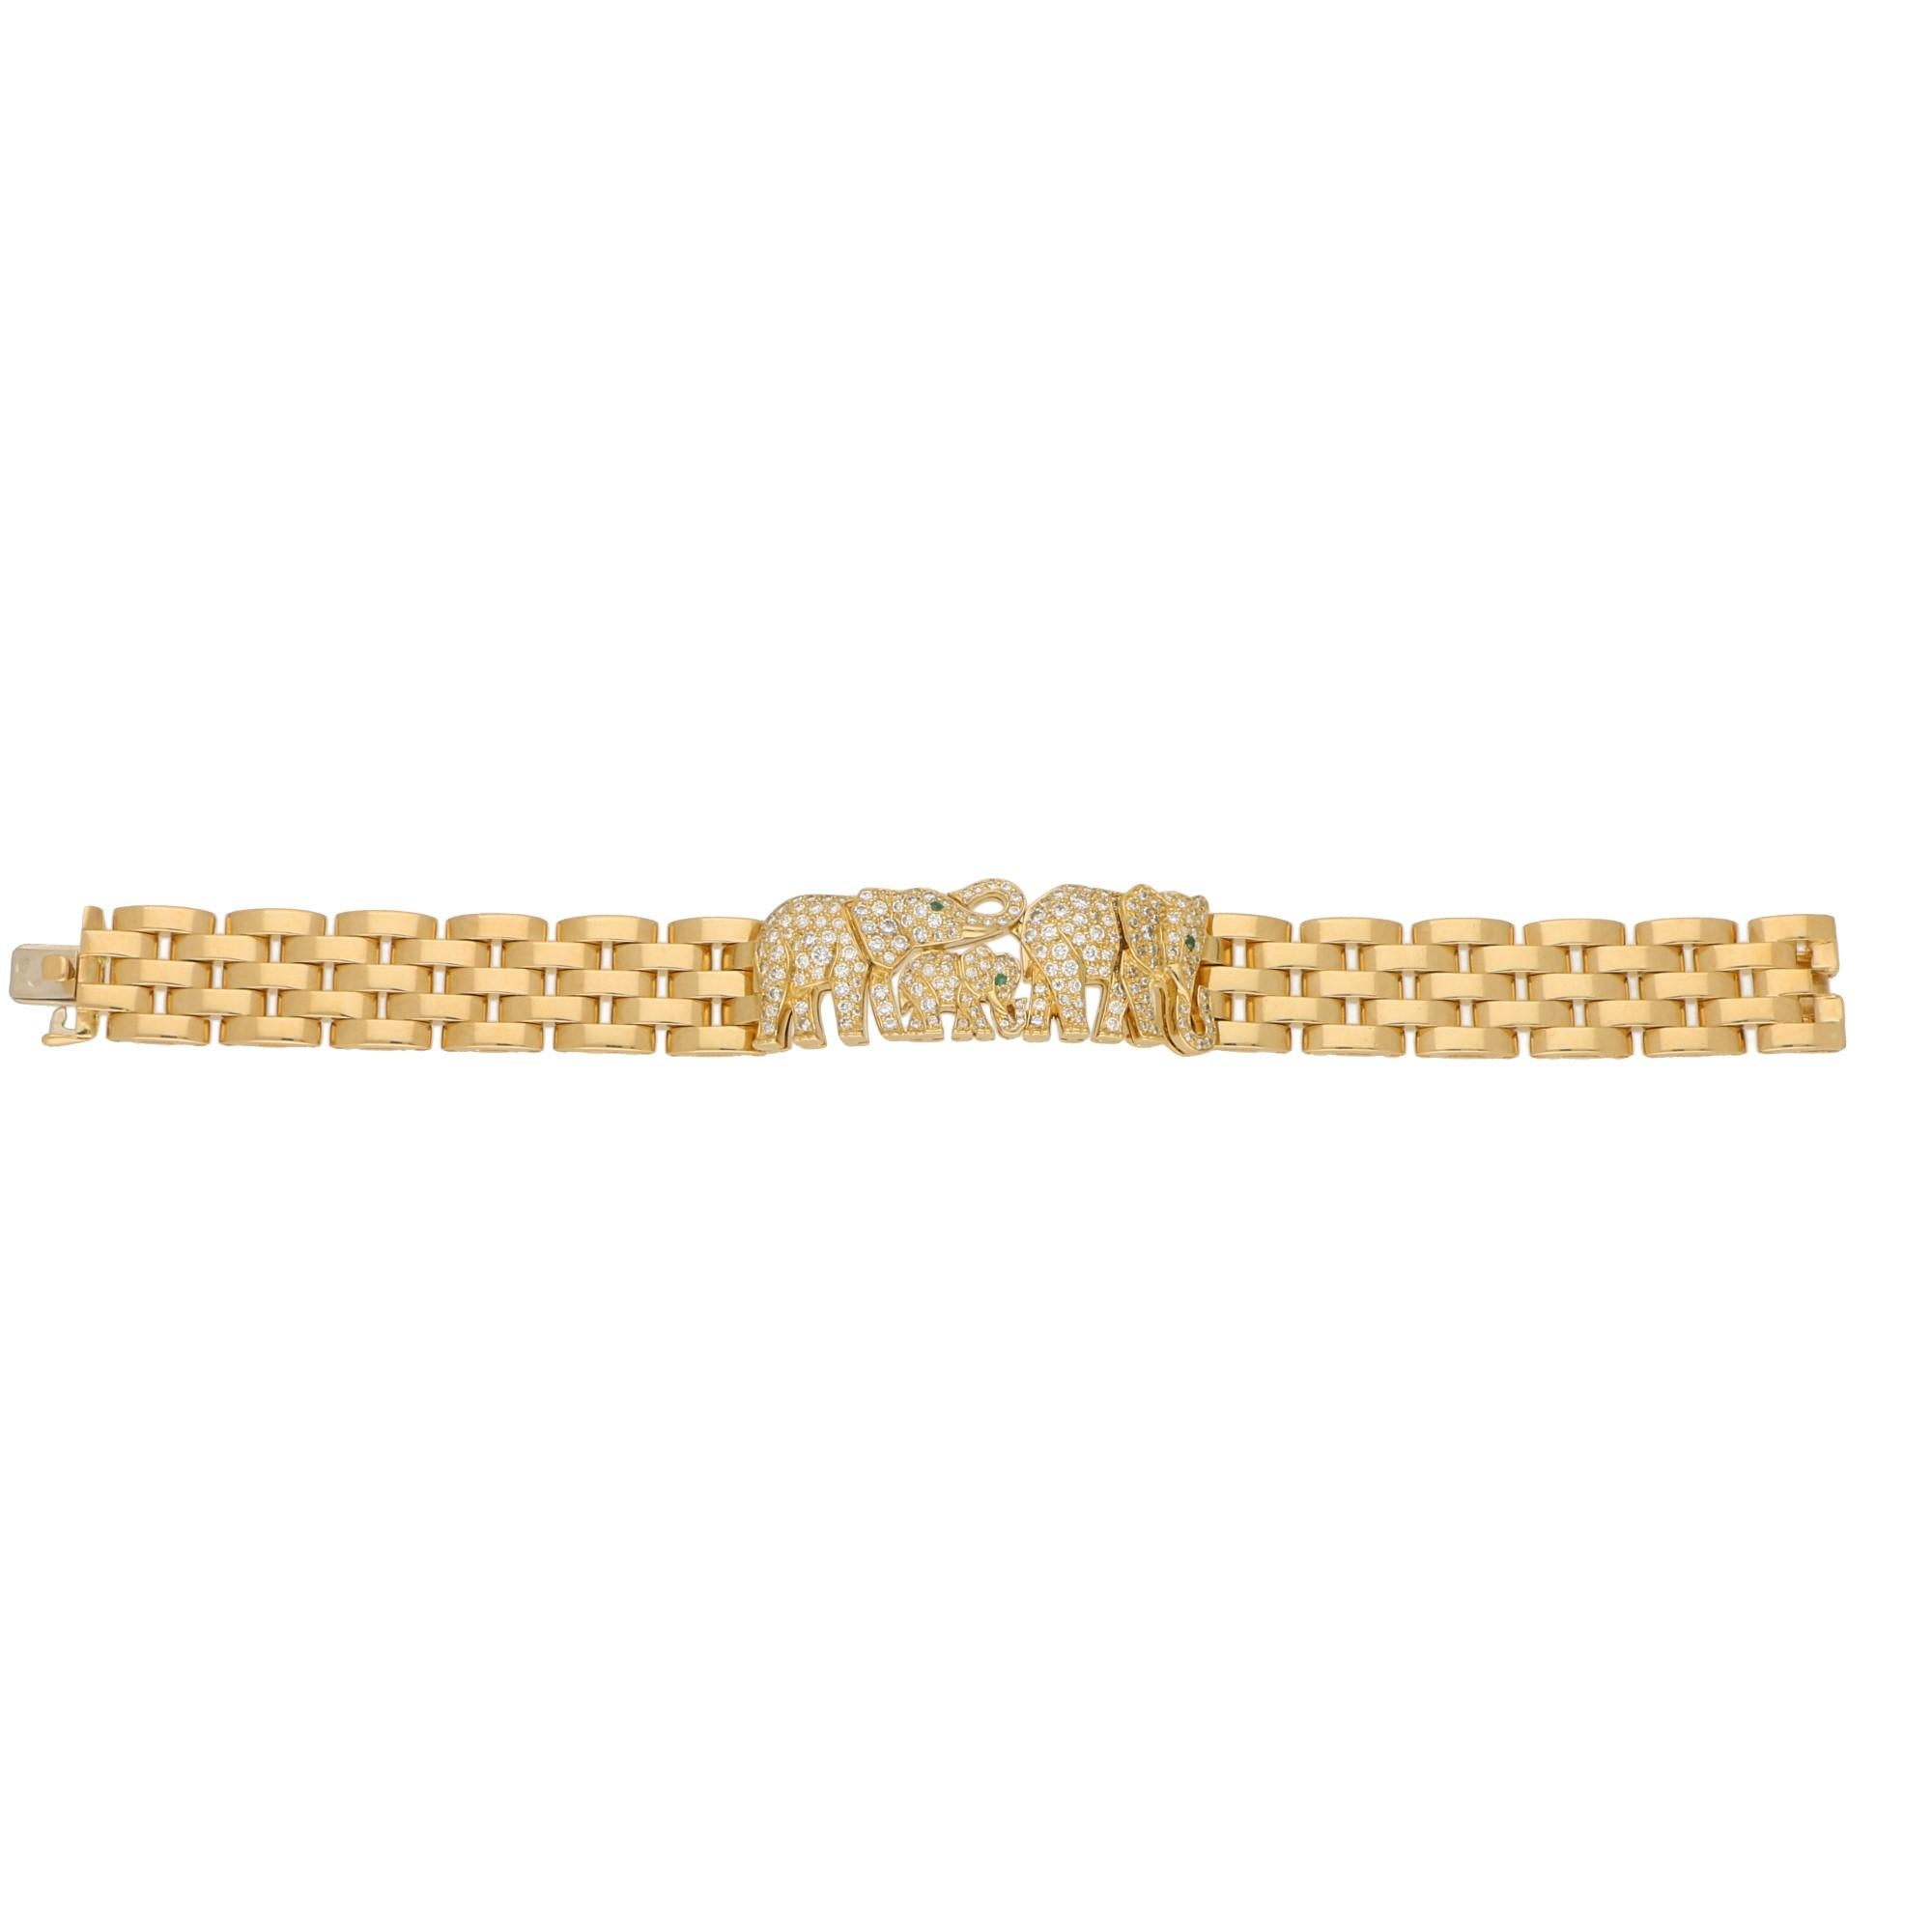 A simply stunning Cartier Paris Elephant Maillon Panthère bracelet set in solid 18k yellow gold; circa early 1980's.

The bracelet is composed of a central panel which depicts a family of three walking elephants. Each elephant is milgrain set with